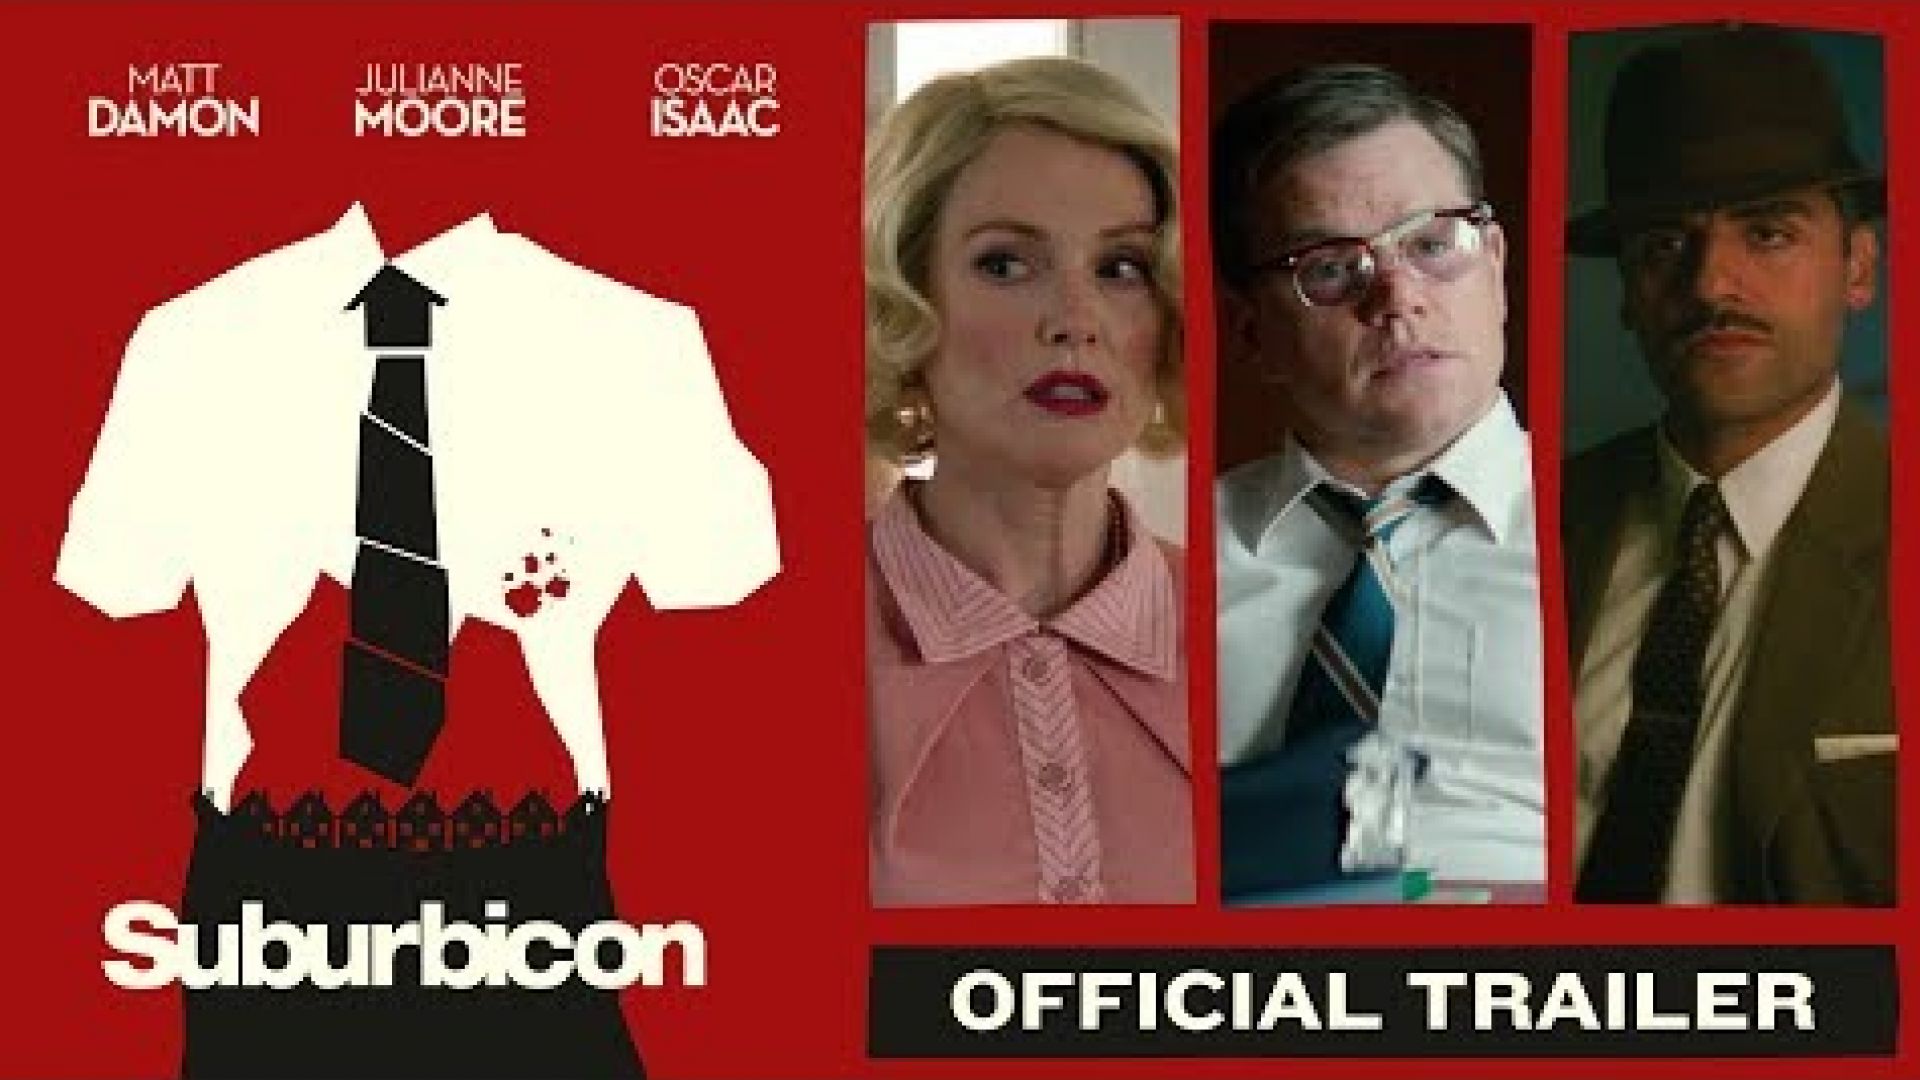 Suburbicon is directed by George Clooney and co-written by G